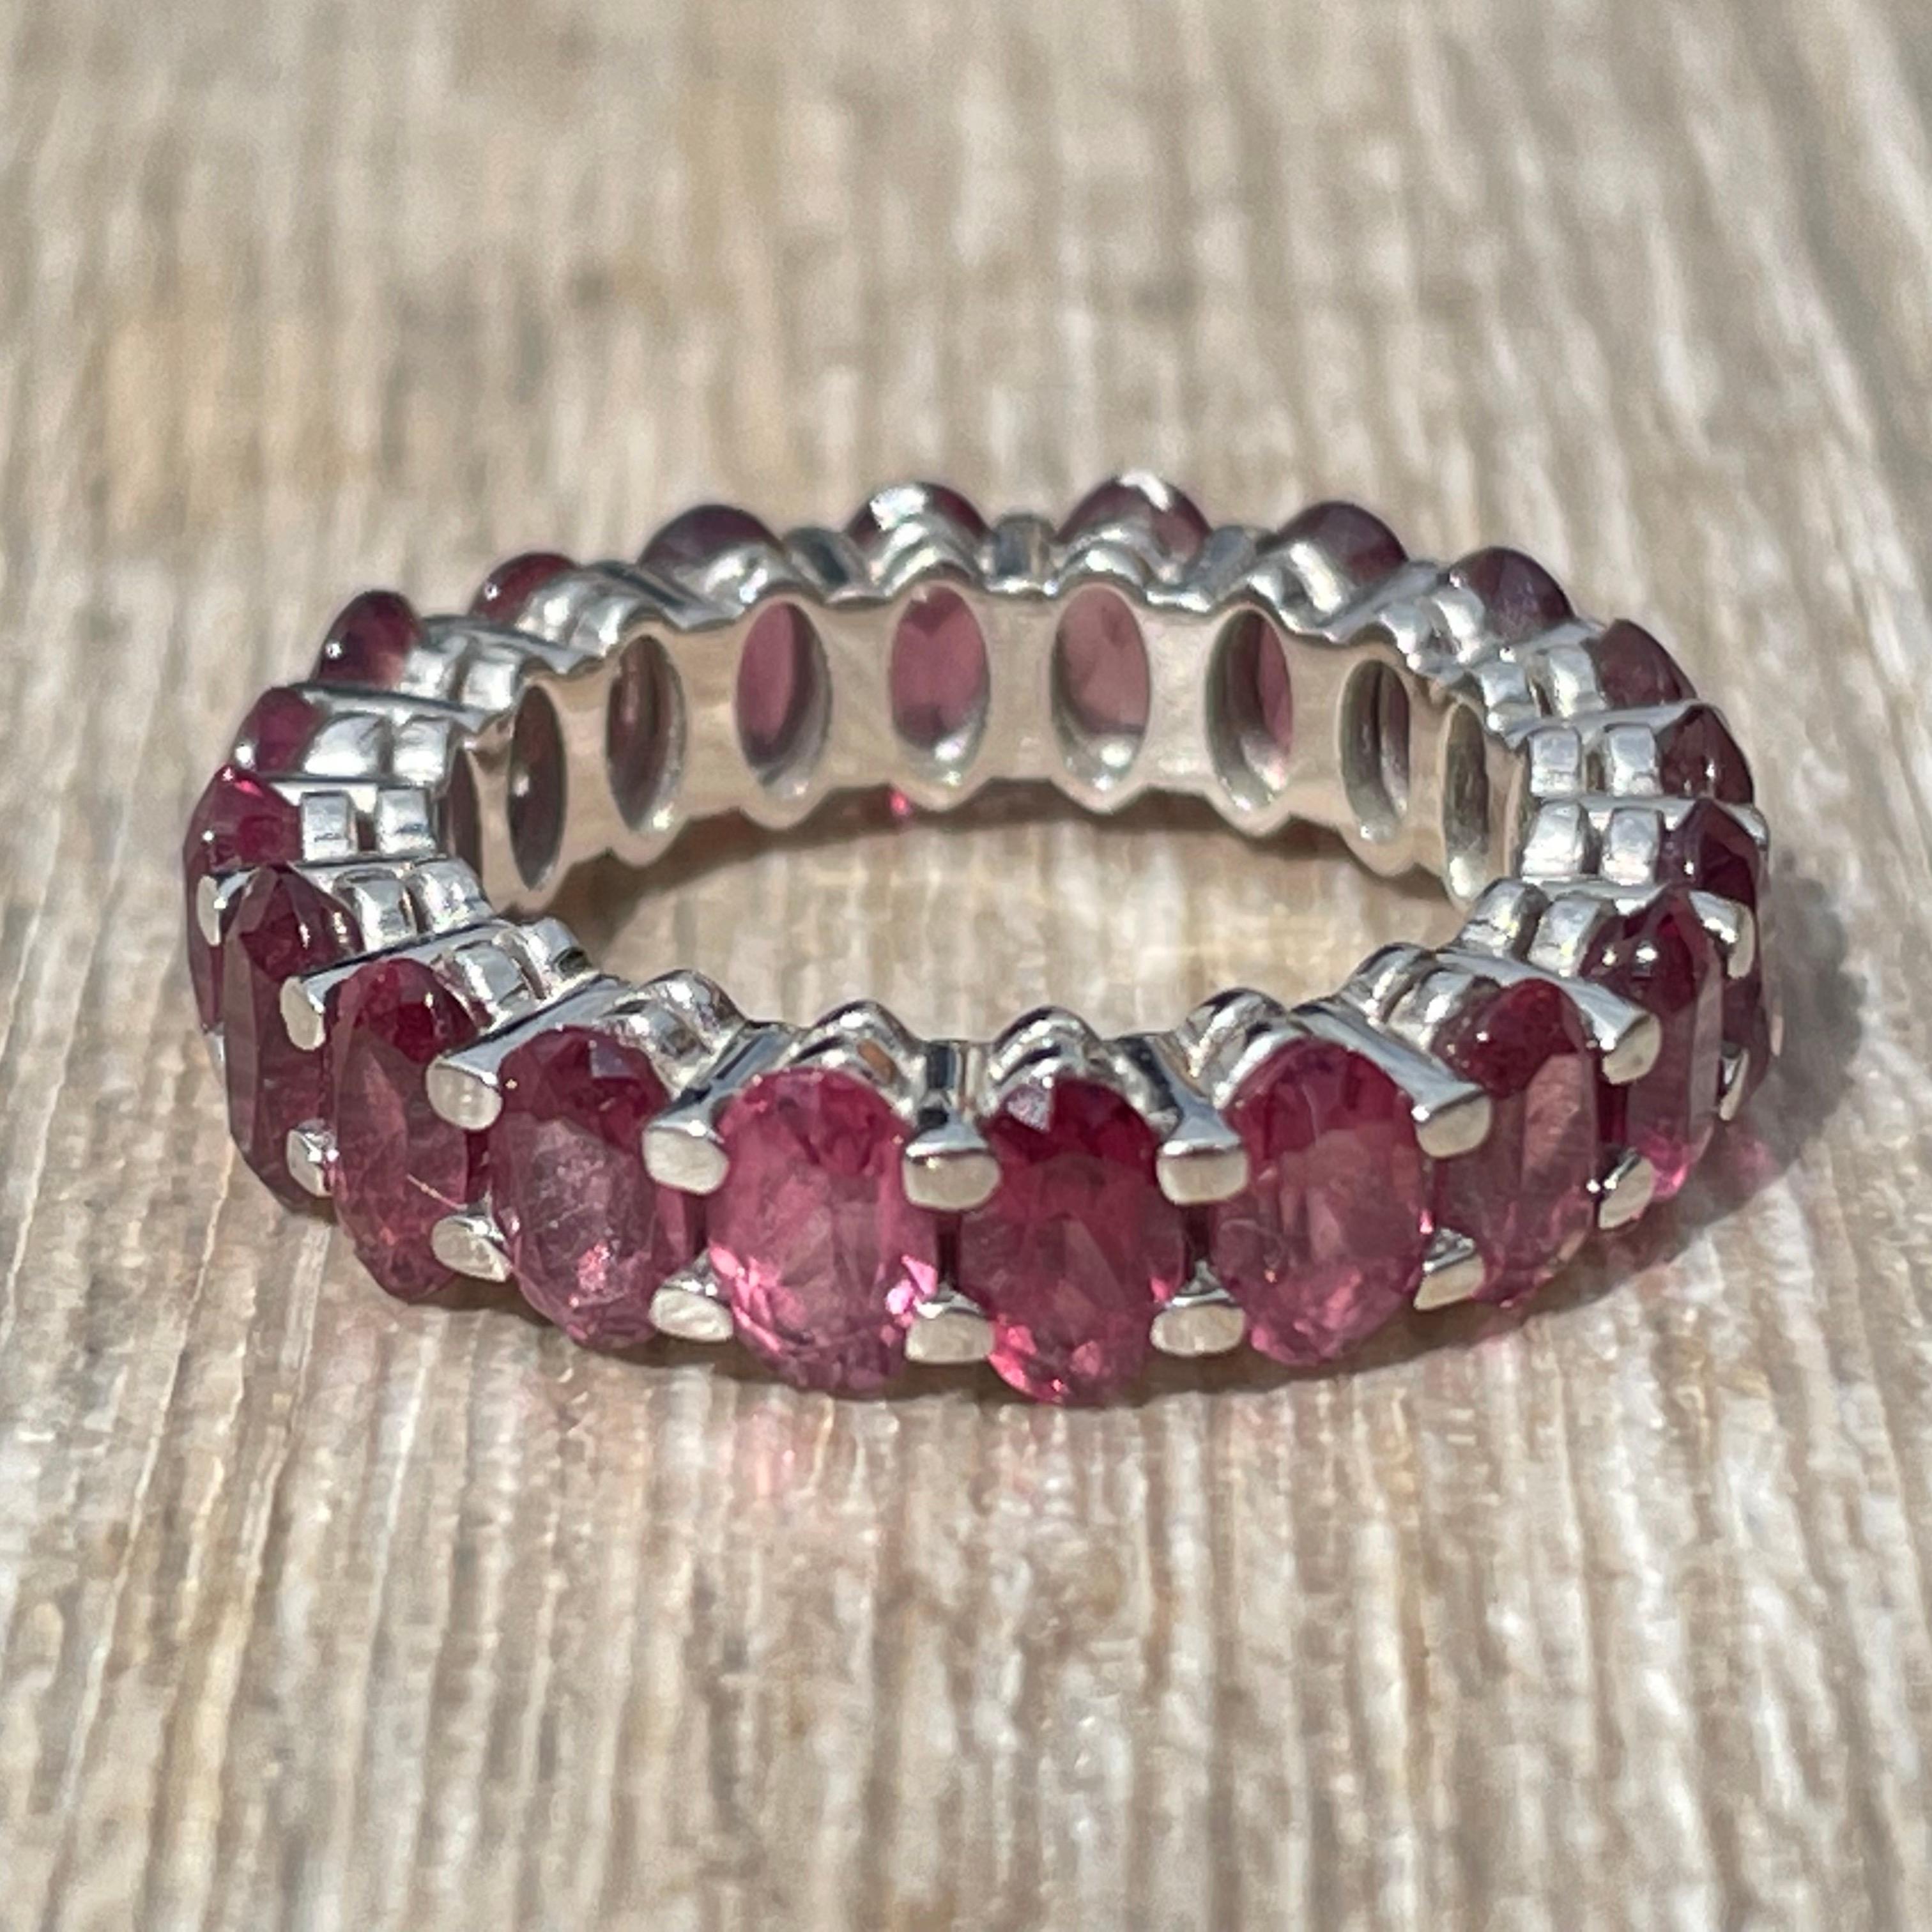 American wedding ring or full set in 18 carat gold or 750 thousandths and AAA rhodolite garnets for a total of 5.80 carats.
A 51 finger turn for a gross weight of 5.50 grams.
Eagle's head hallmark.